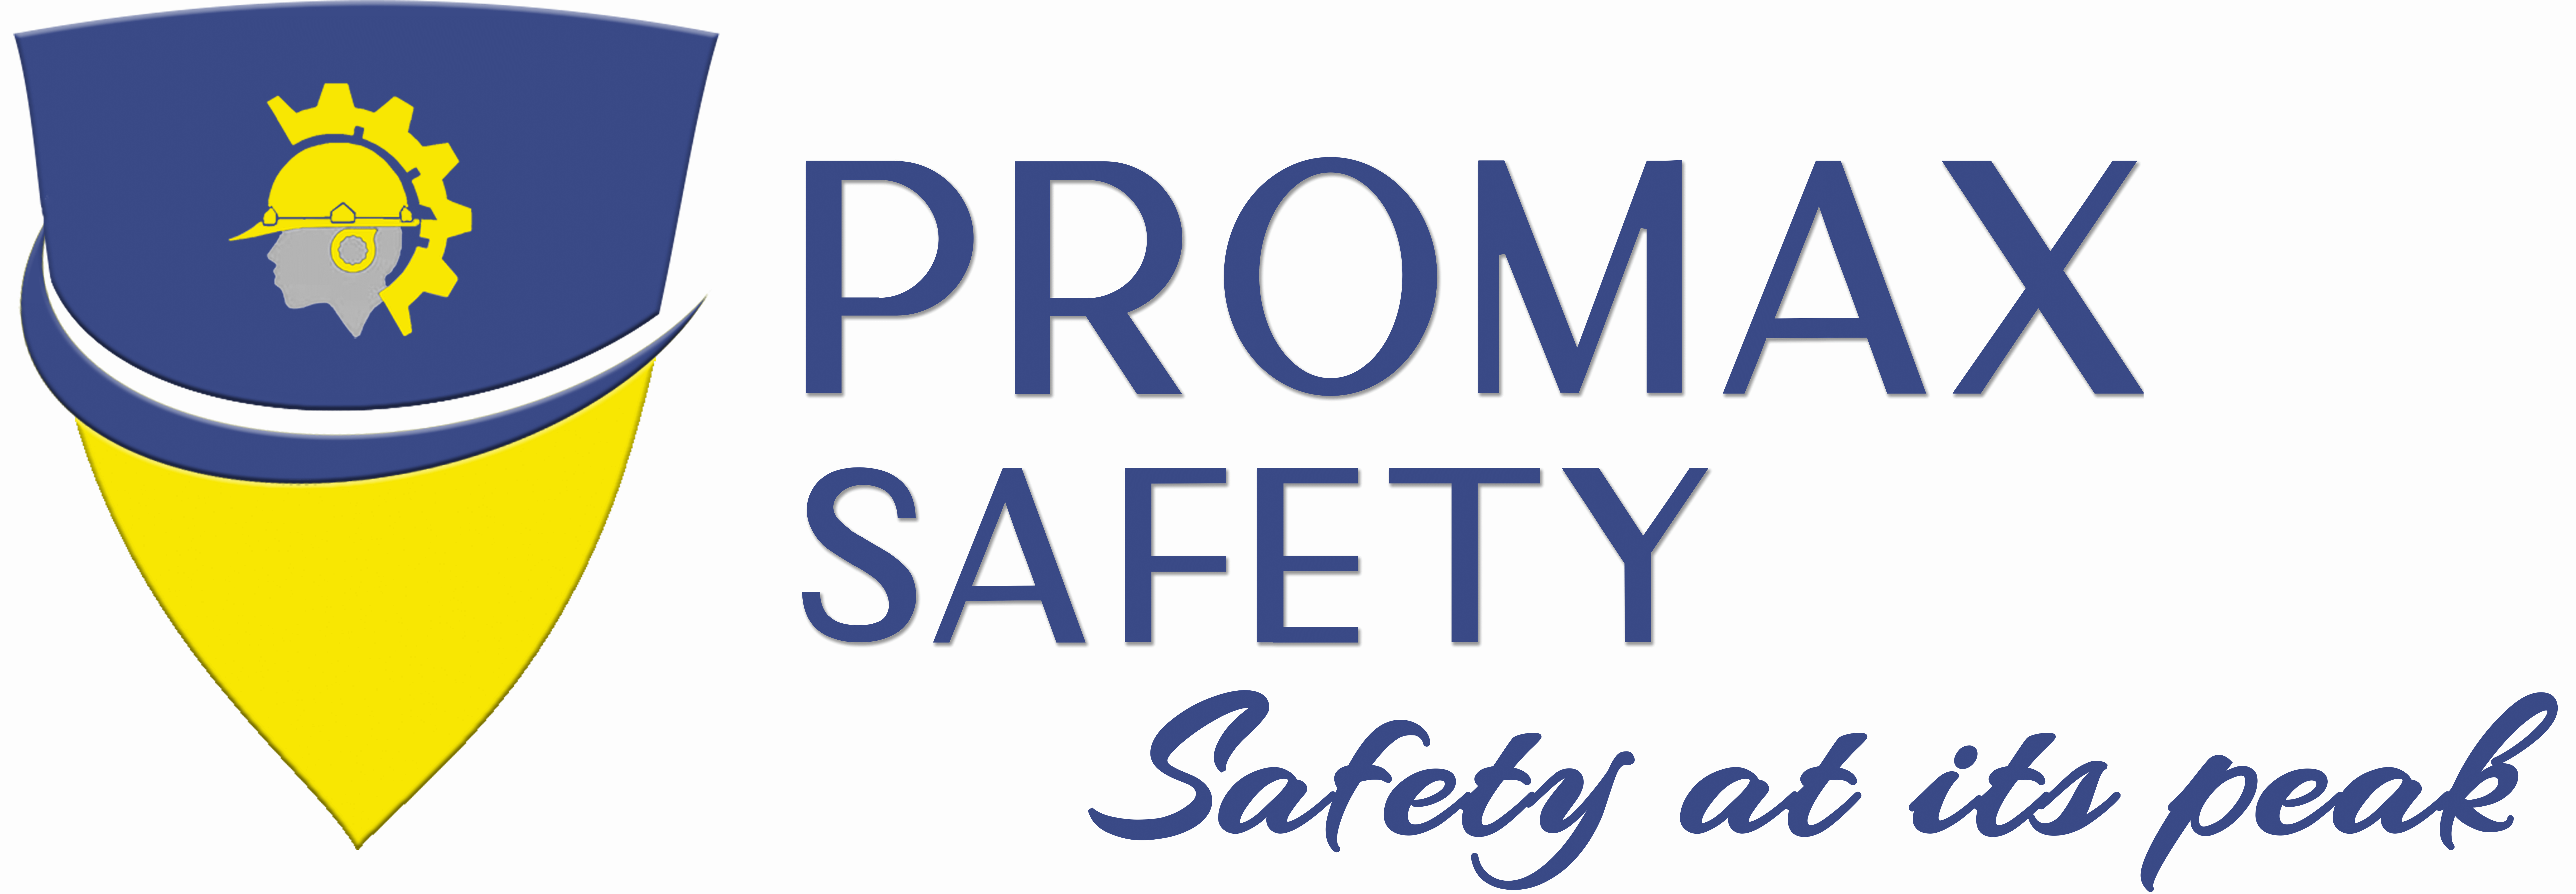 Promax Safety